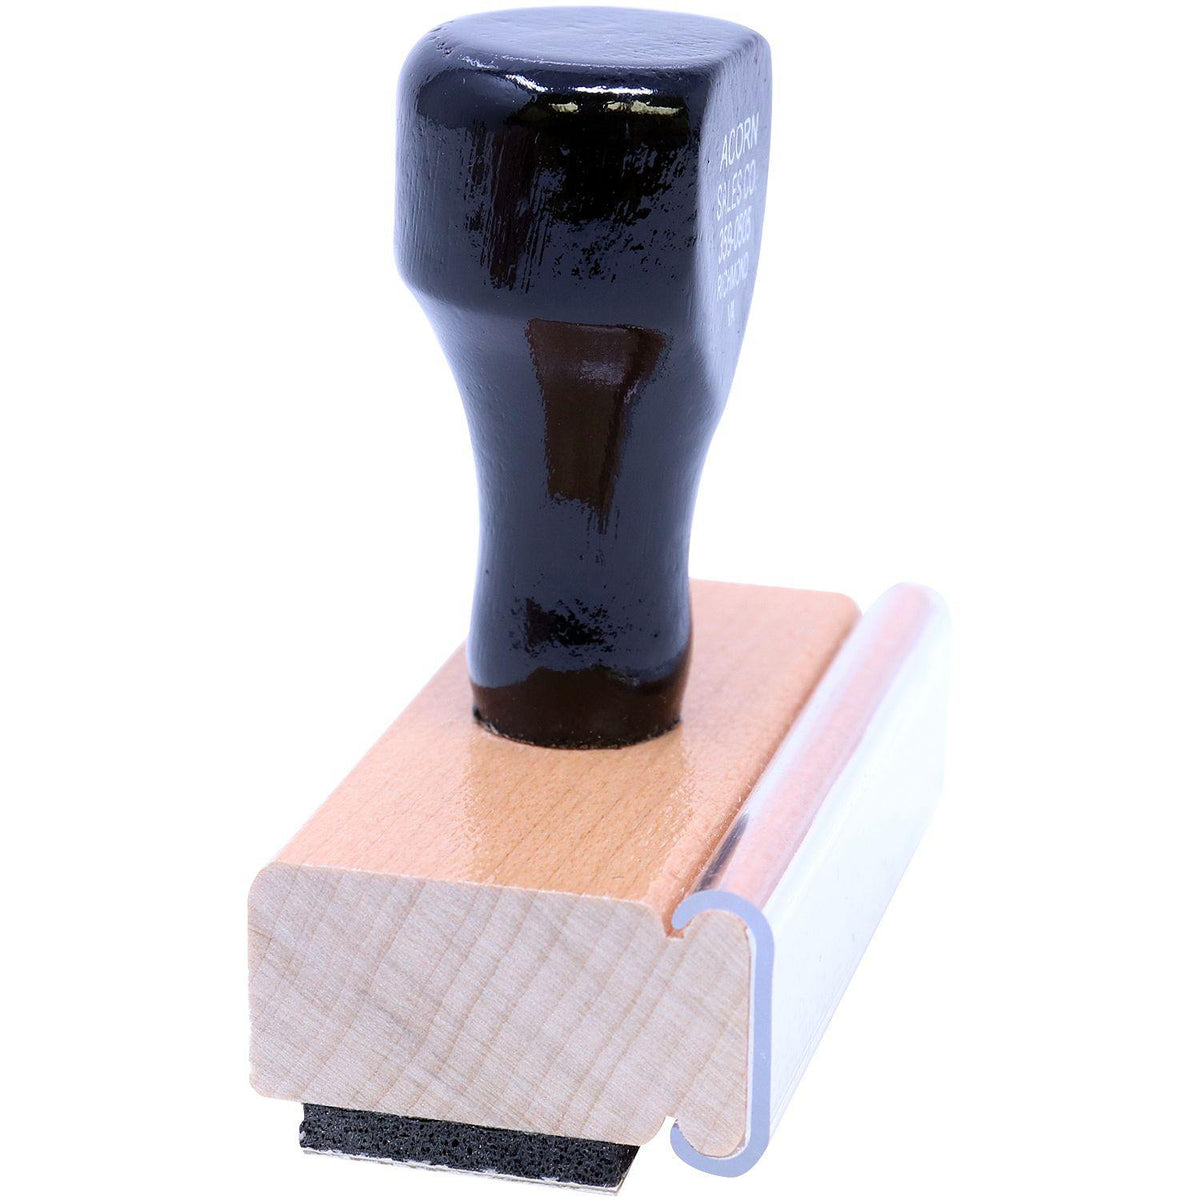 Side View of Large Narrow Past Due Rubber Stamp at an Angle